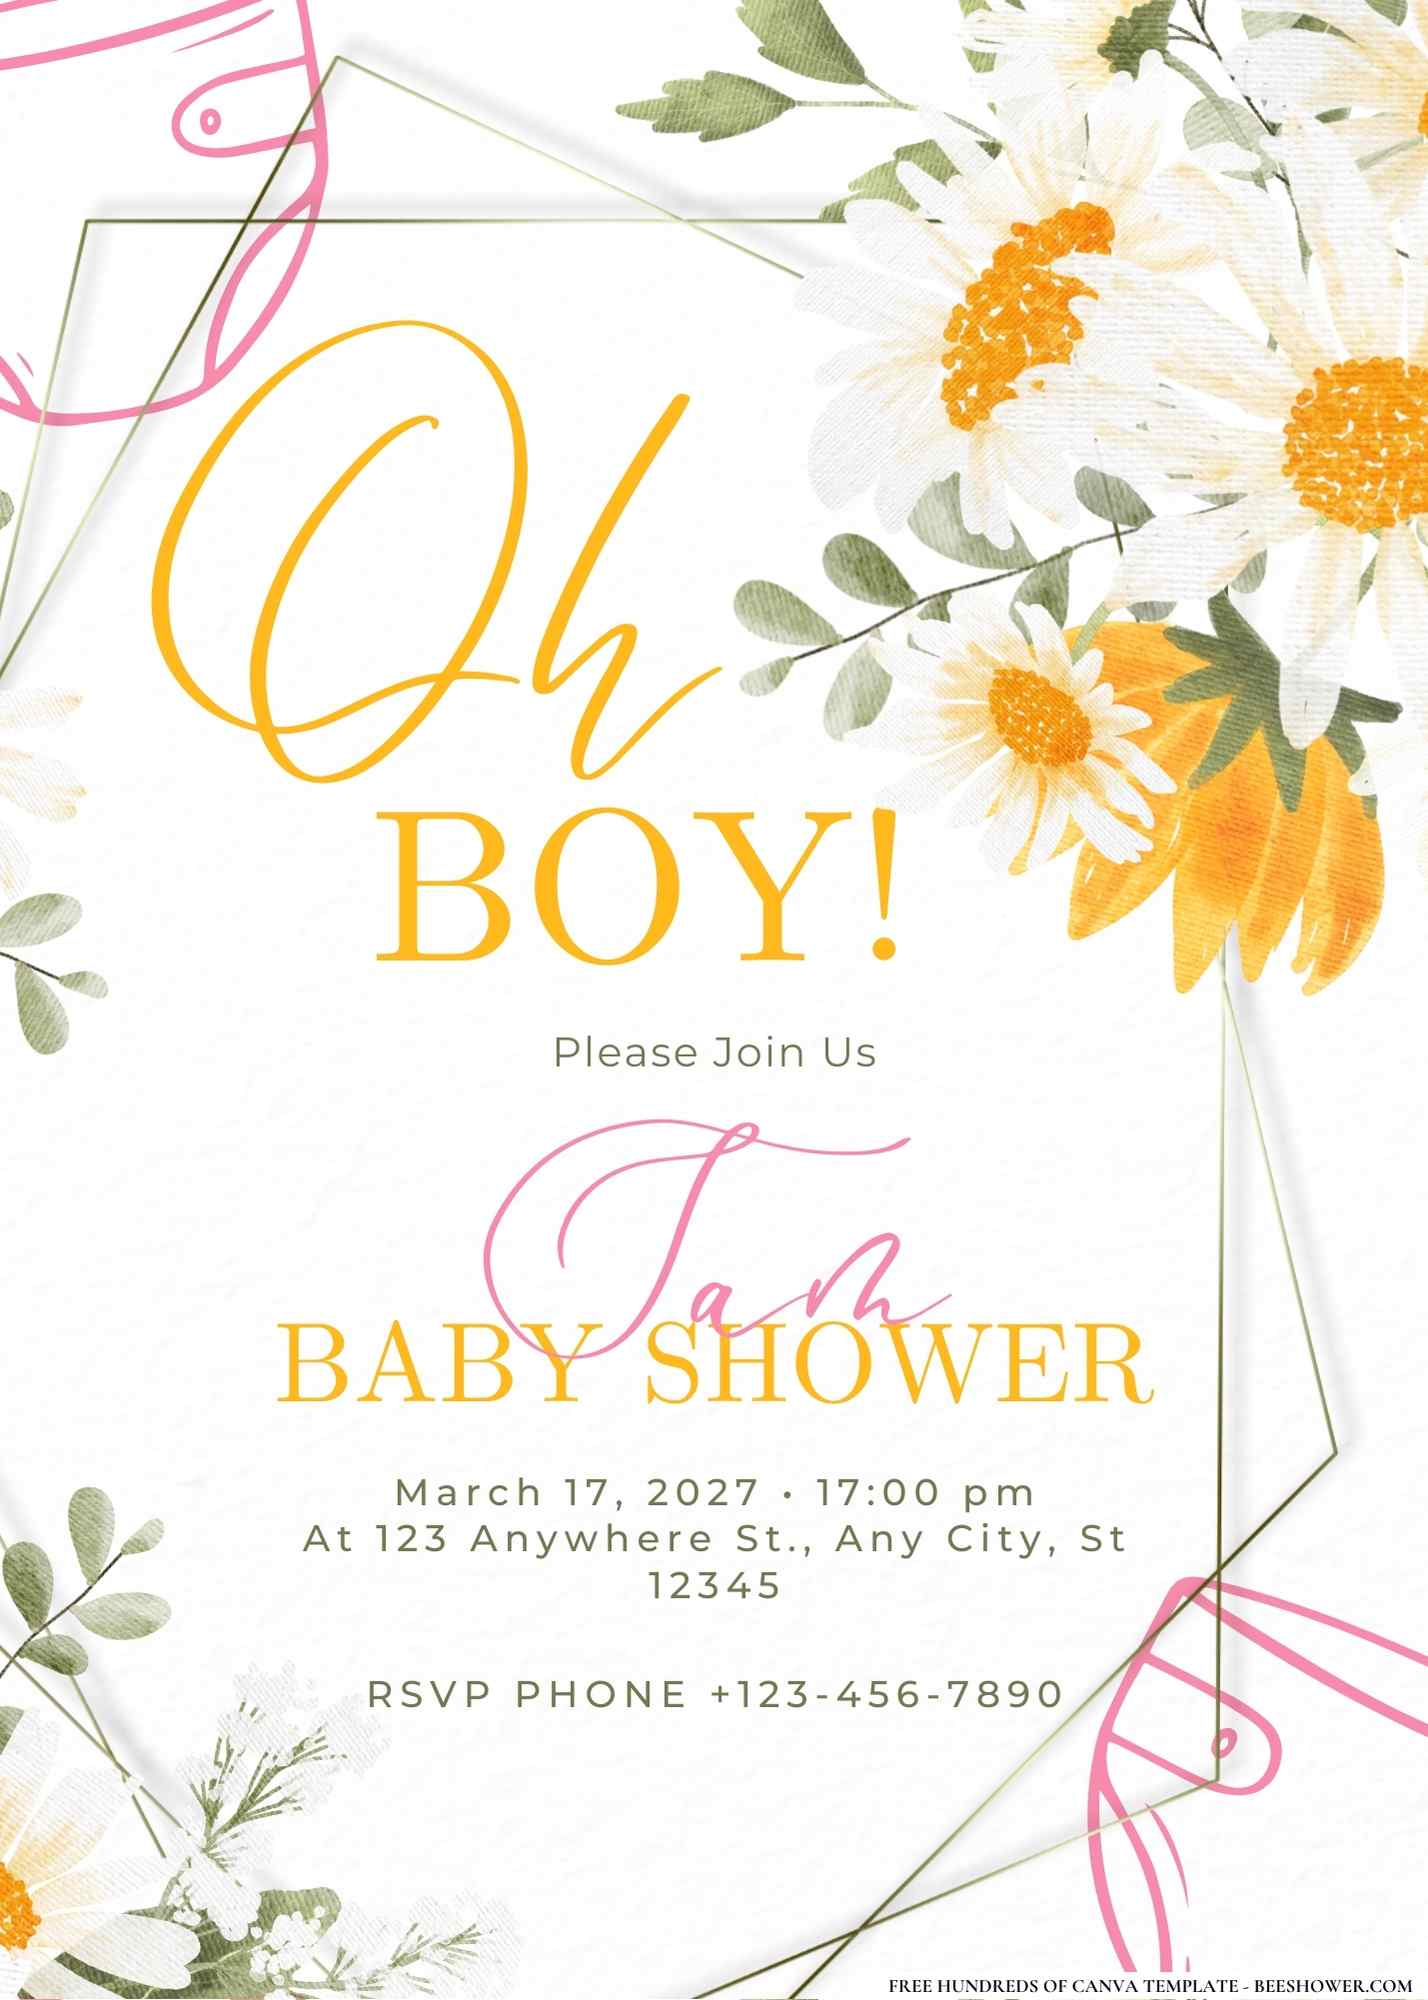 Daisy Chains and Diapers Baby Shower Invitation